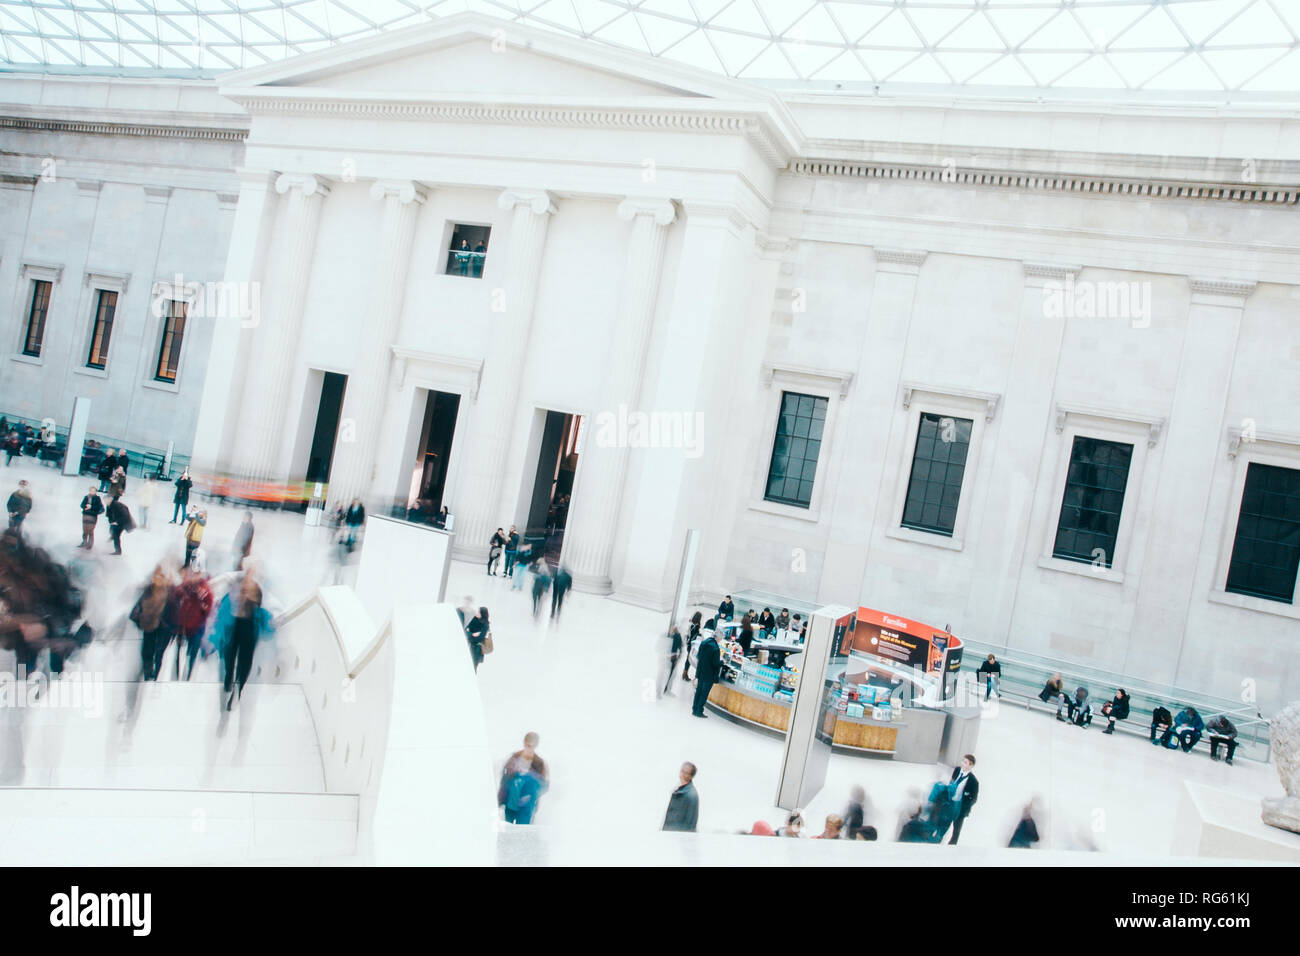 Long exposure from the British Museum in London. Tourism in London Stock Photo